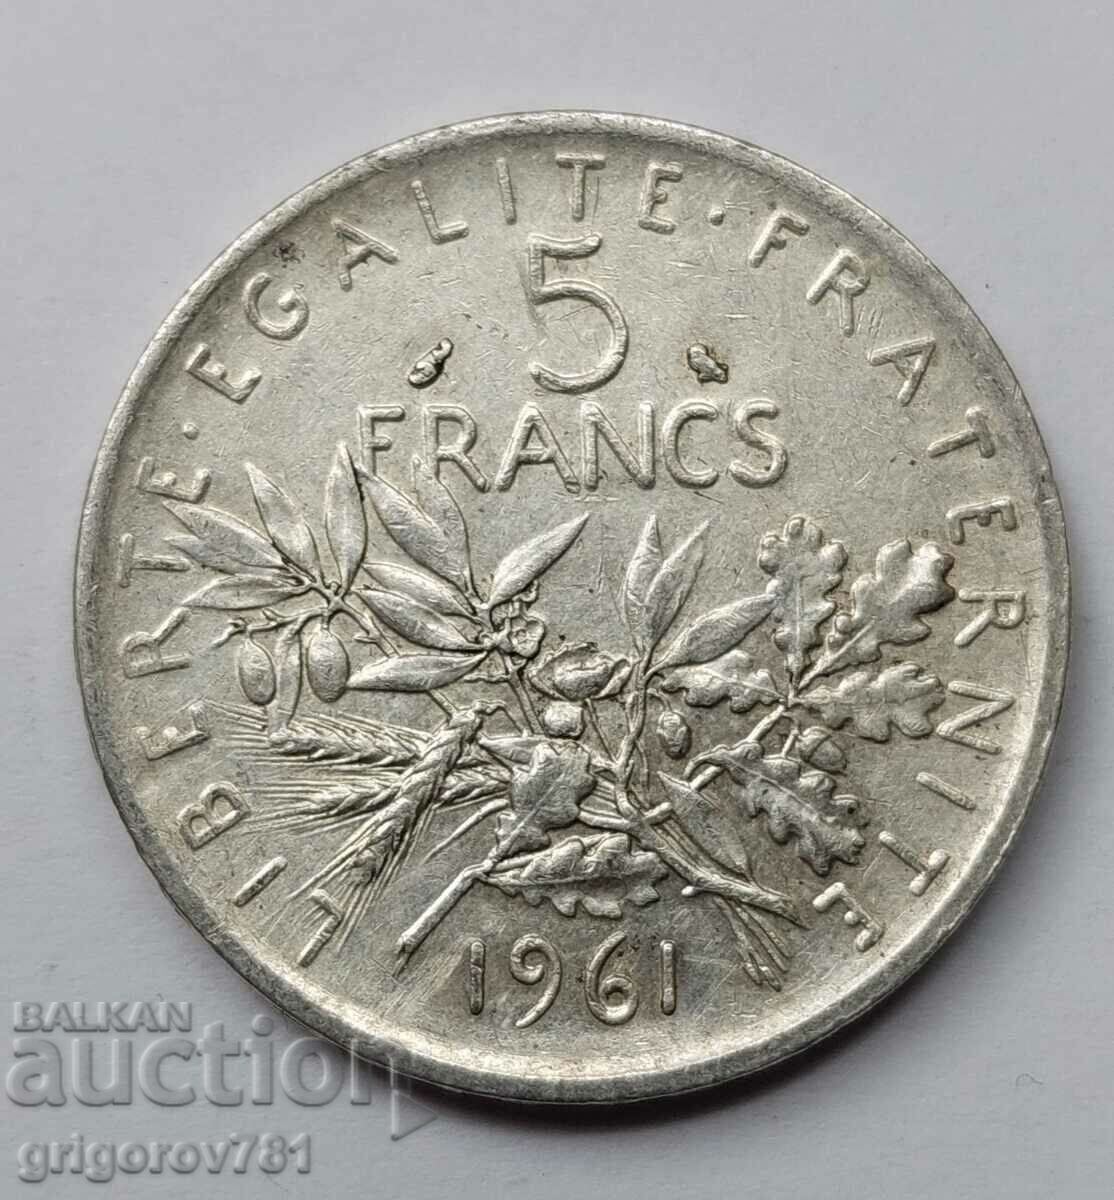 5 Francs Silver France 1961 - Silver Coin #1